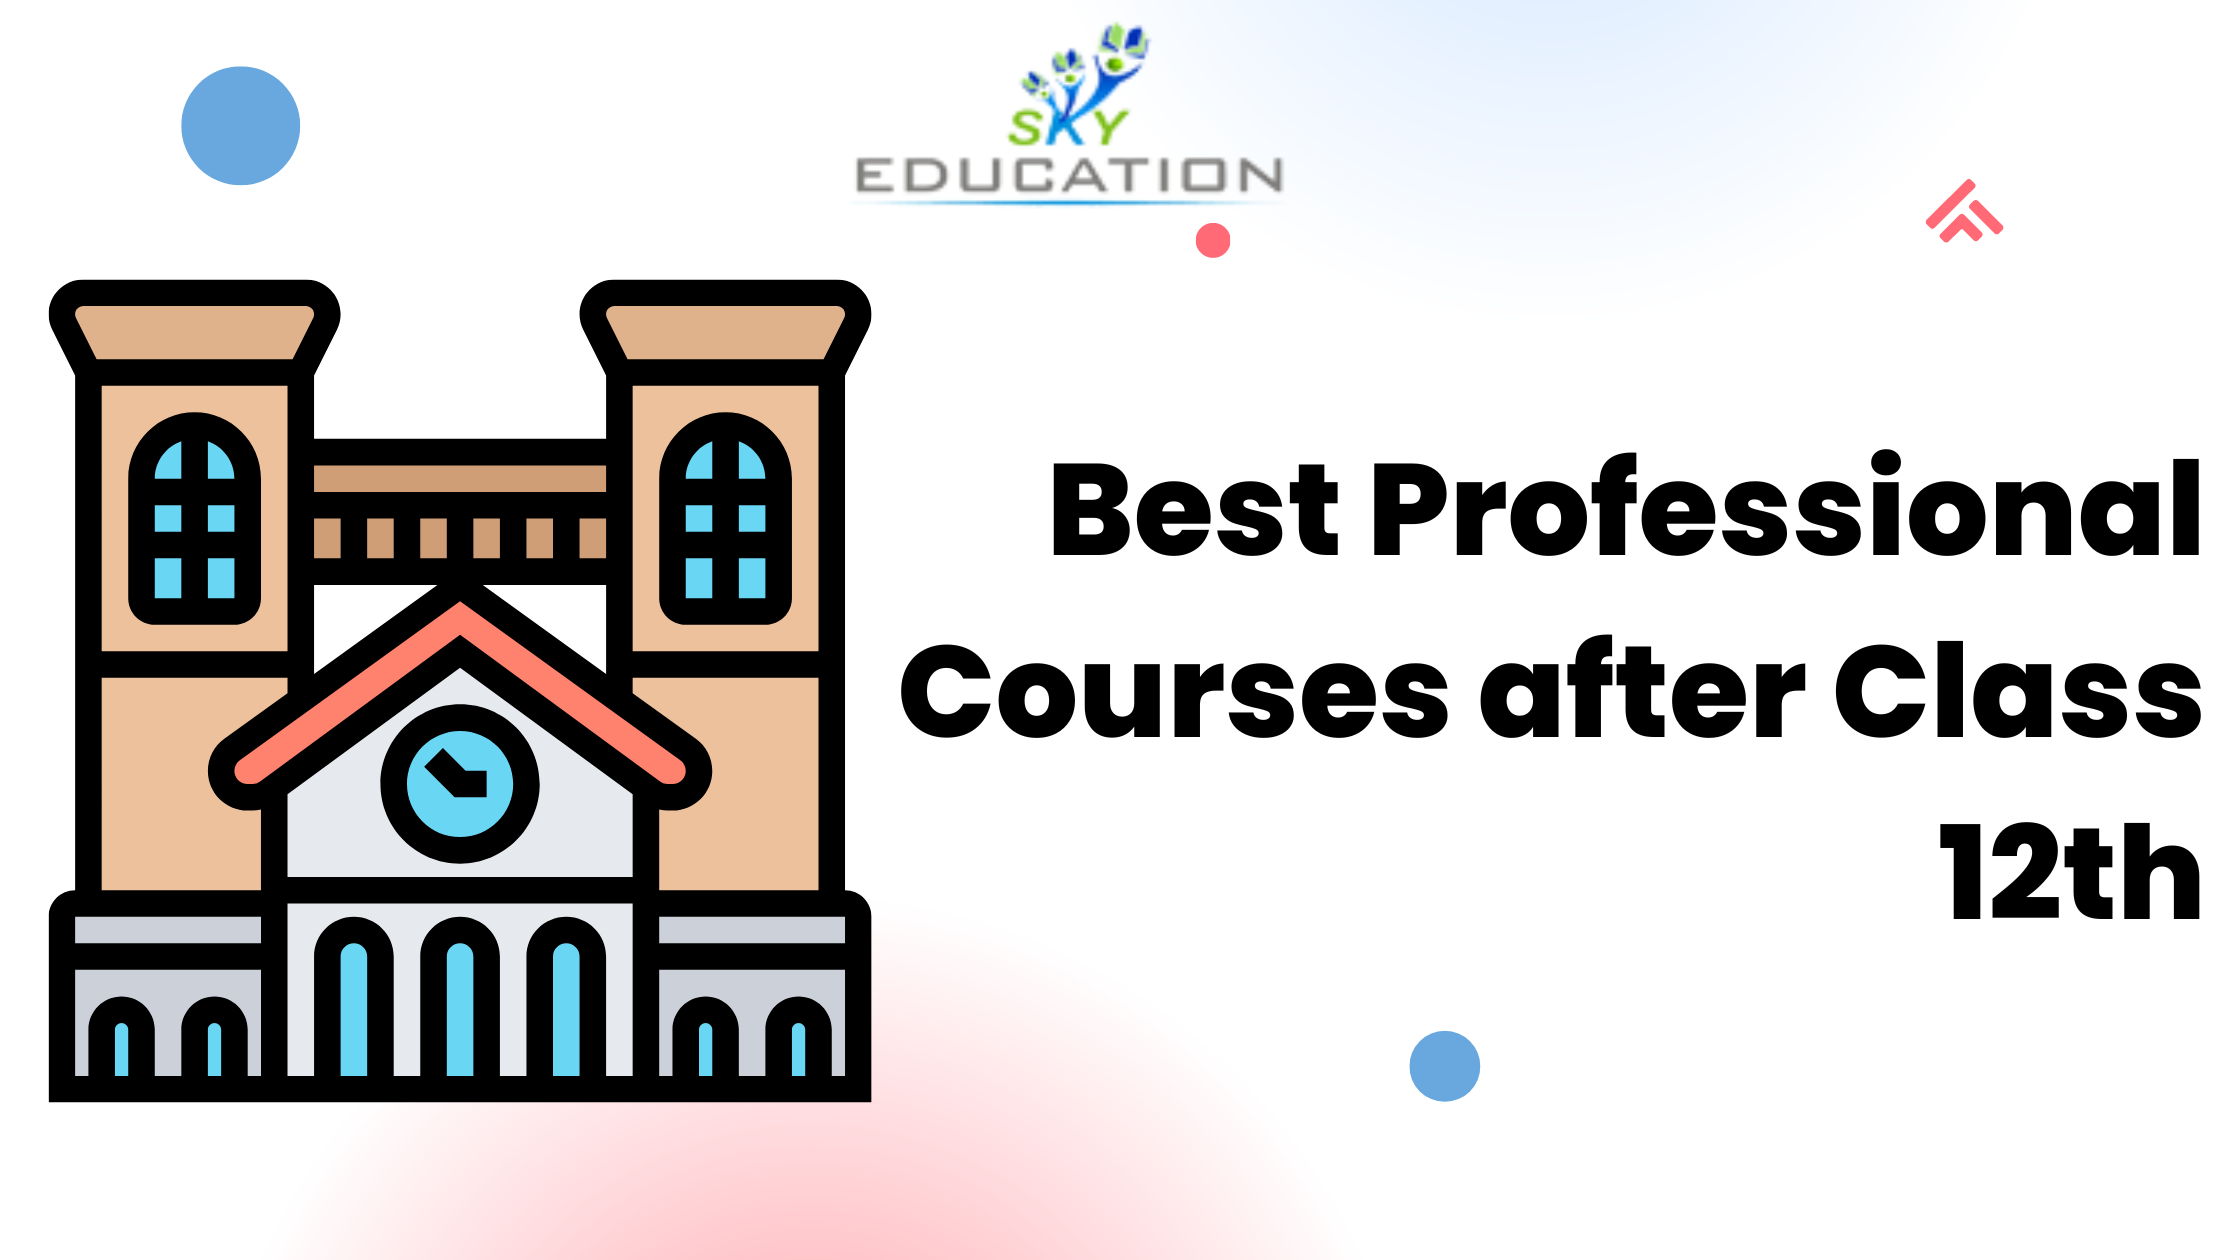 Exploring the Best Professional Courses after 12th